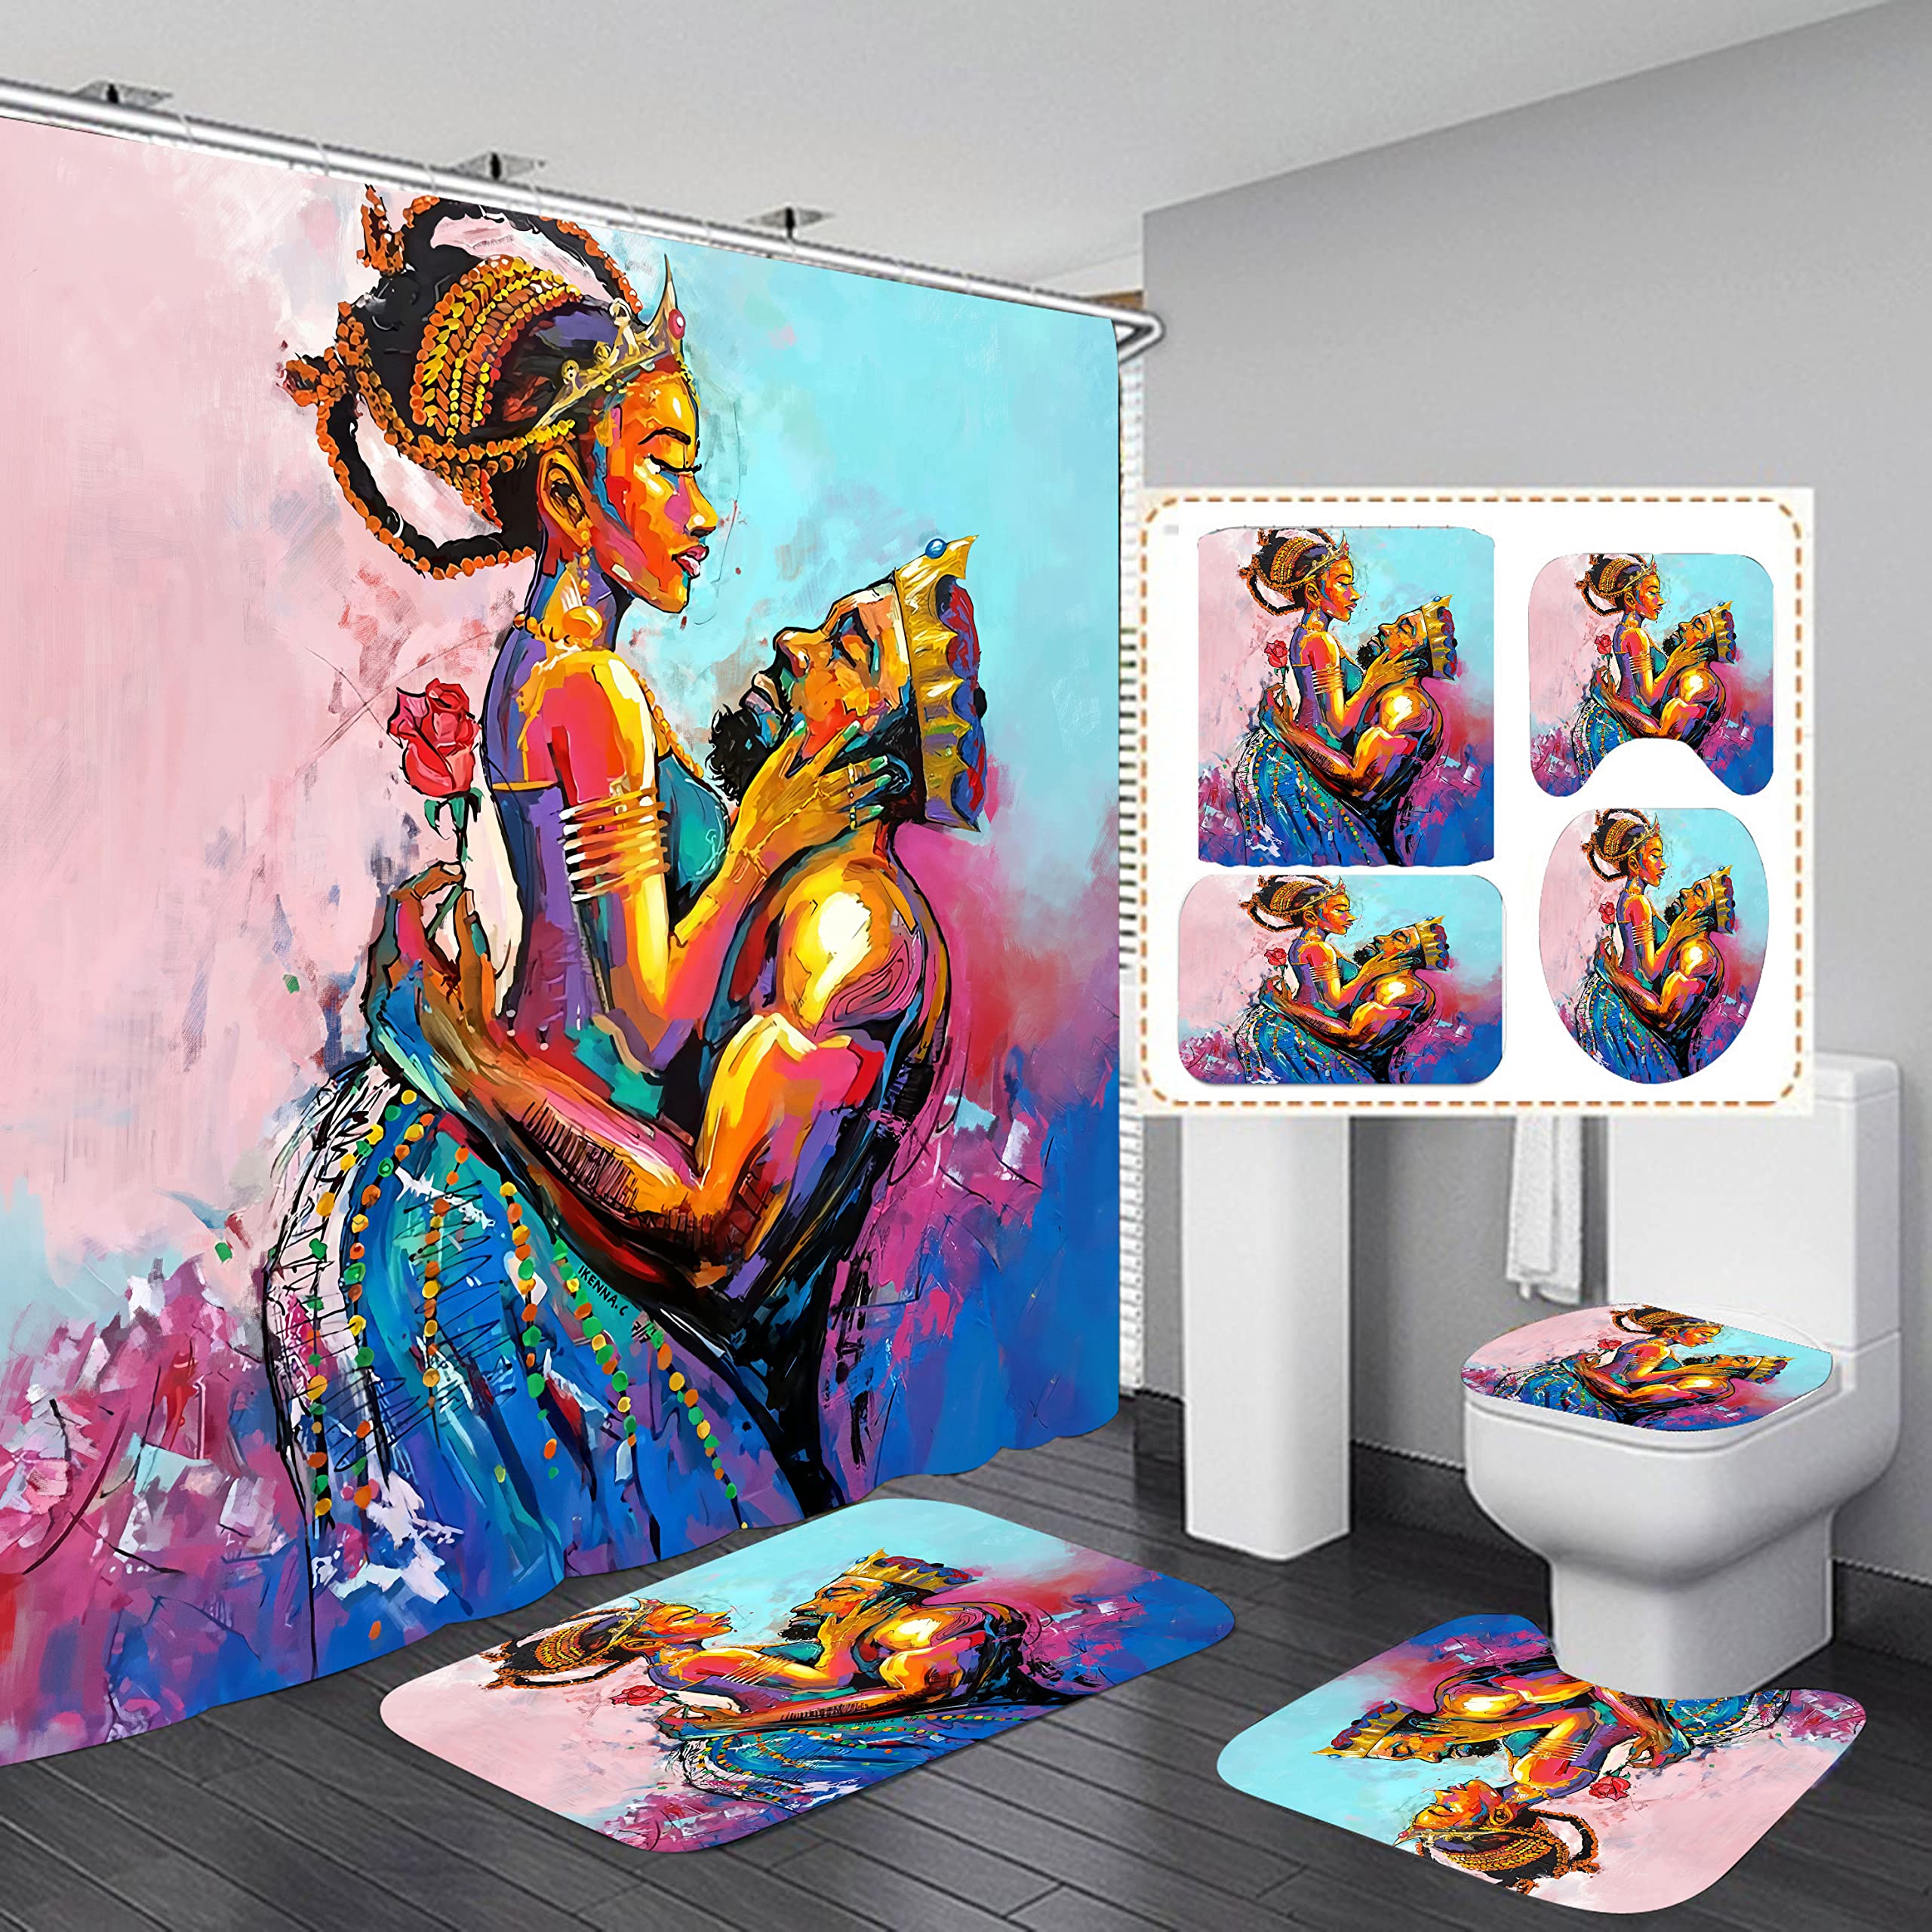 Fancy Decorated Wall Painting Graffiti Art Style African Men and Women Romantic and Sexy Black People Portrait Polyester Shower Curtain Home Bathro...